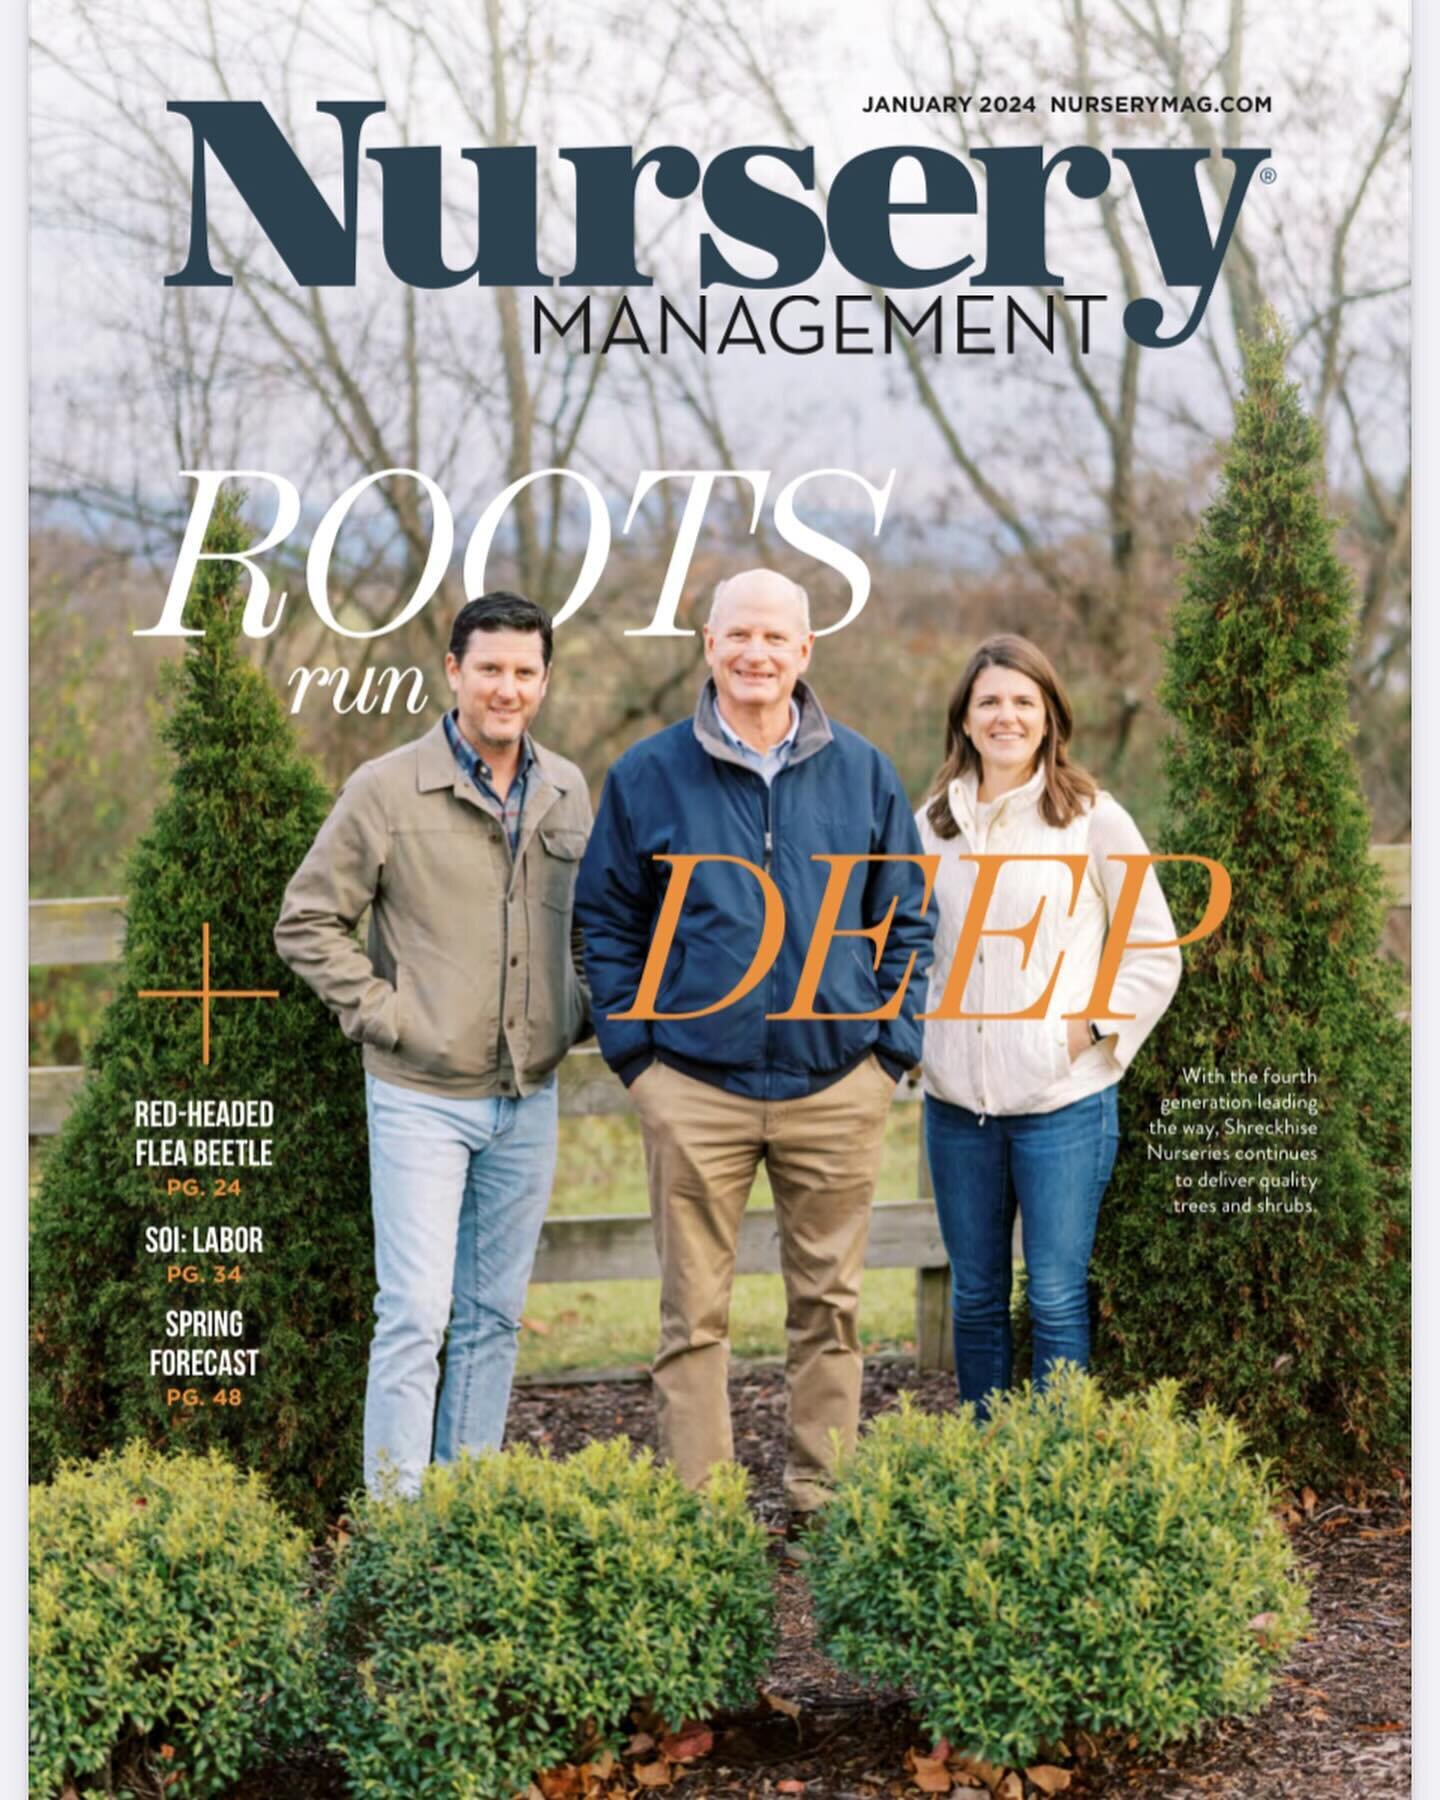 We are honored to be featured in our industry&rsquo;s top publication, @nurserymanagementmagazine.  Link to the article in bio.